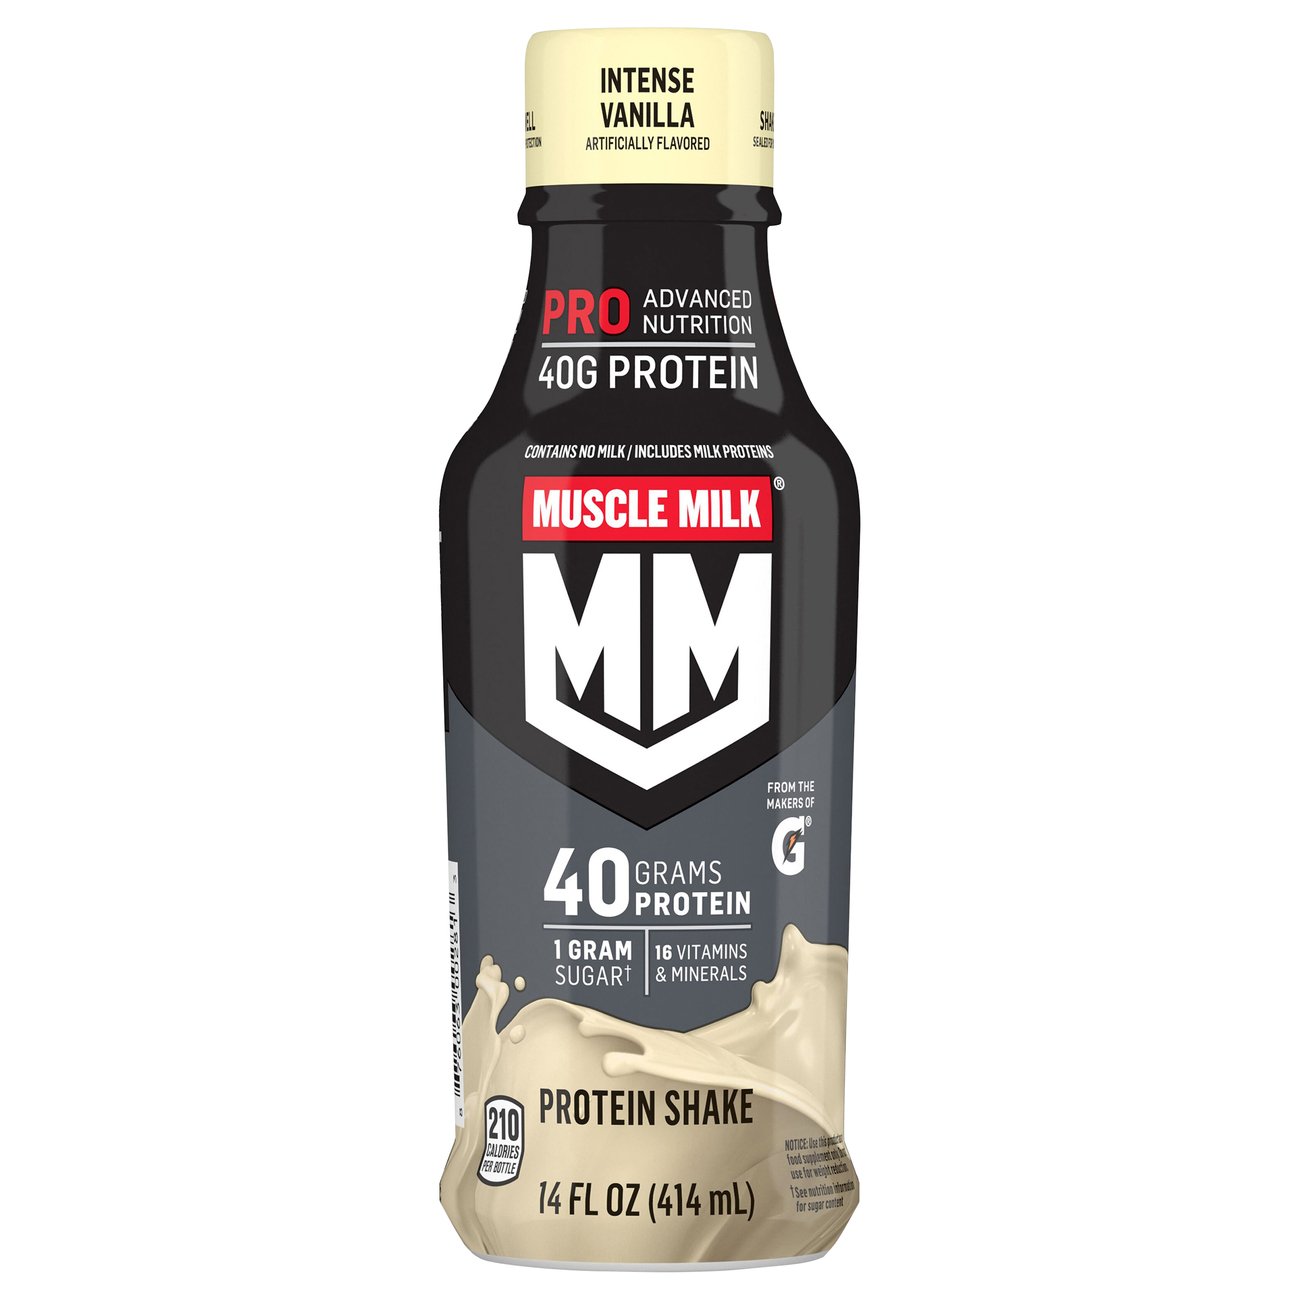 Muscle Milk Pro Series Protein - Review